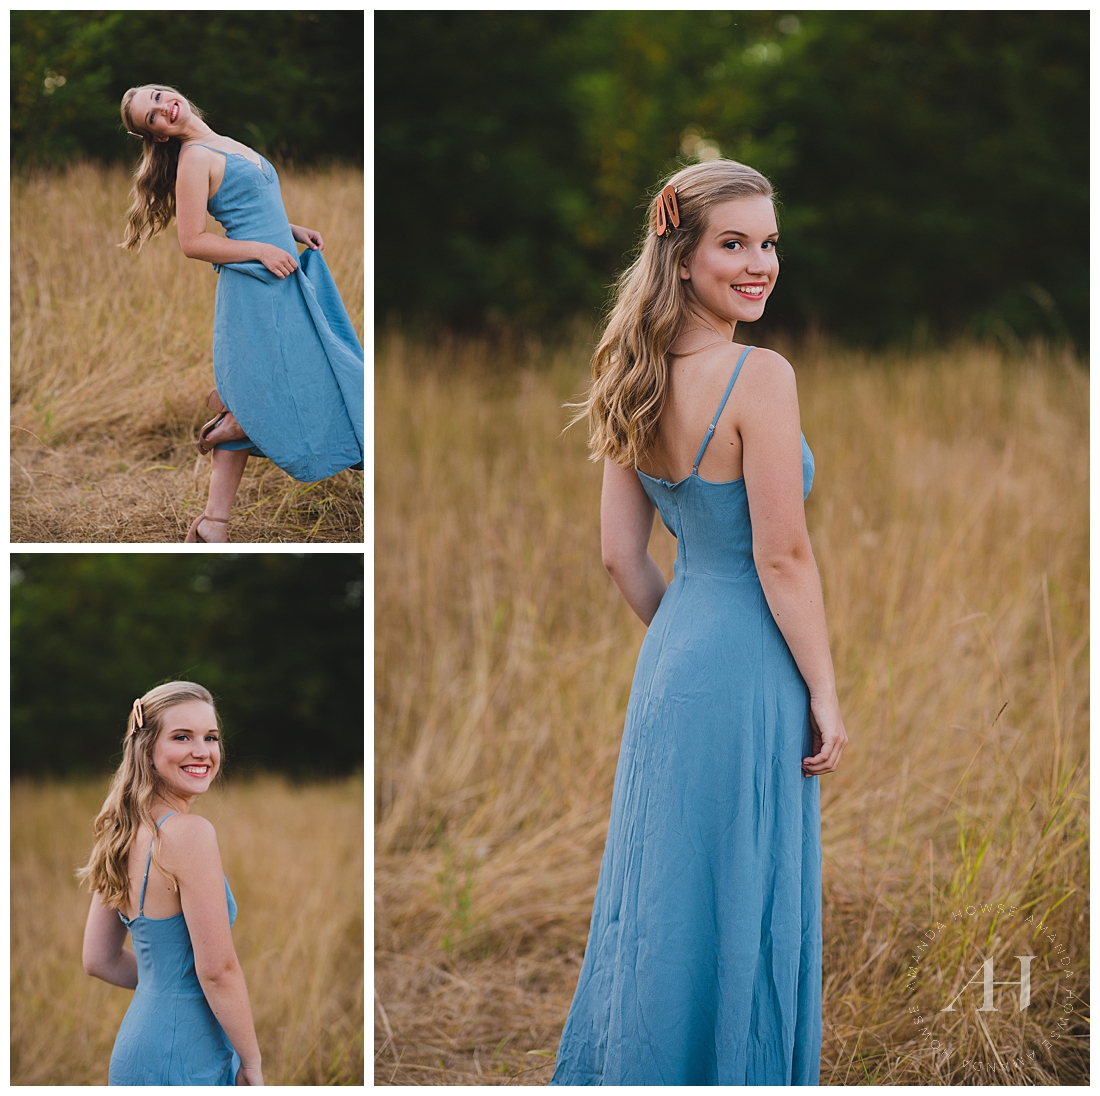 High School Senior Girl in Long, Flowy Blue Dress | Rustic Senior Portraits, What to Wear for Country Senior Portraits, How to Style Outdoor Senior Portraits in Hot Weather | Photographed by the Best Tacoma Senior Portrait Photographer Amanda Howse